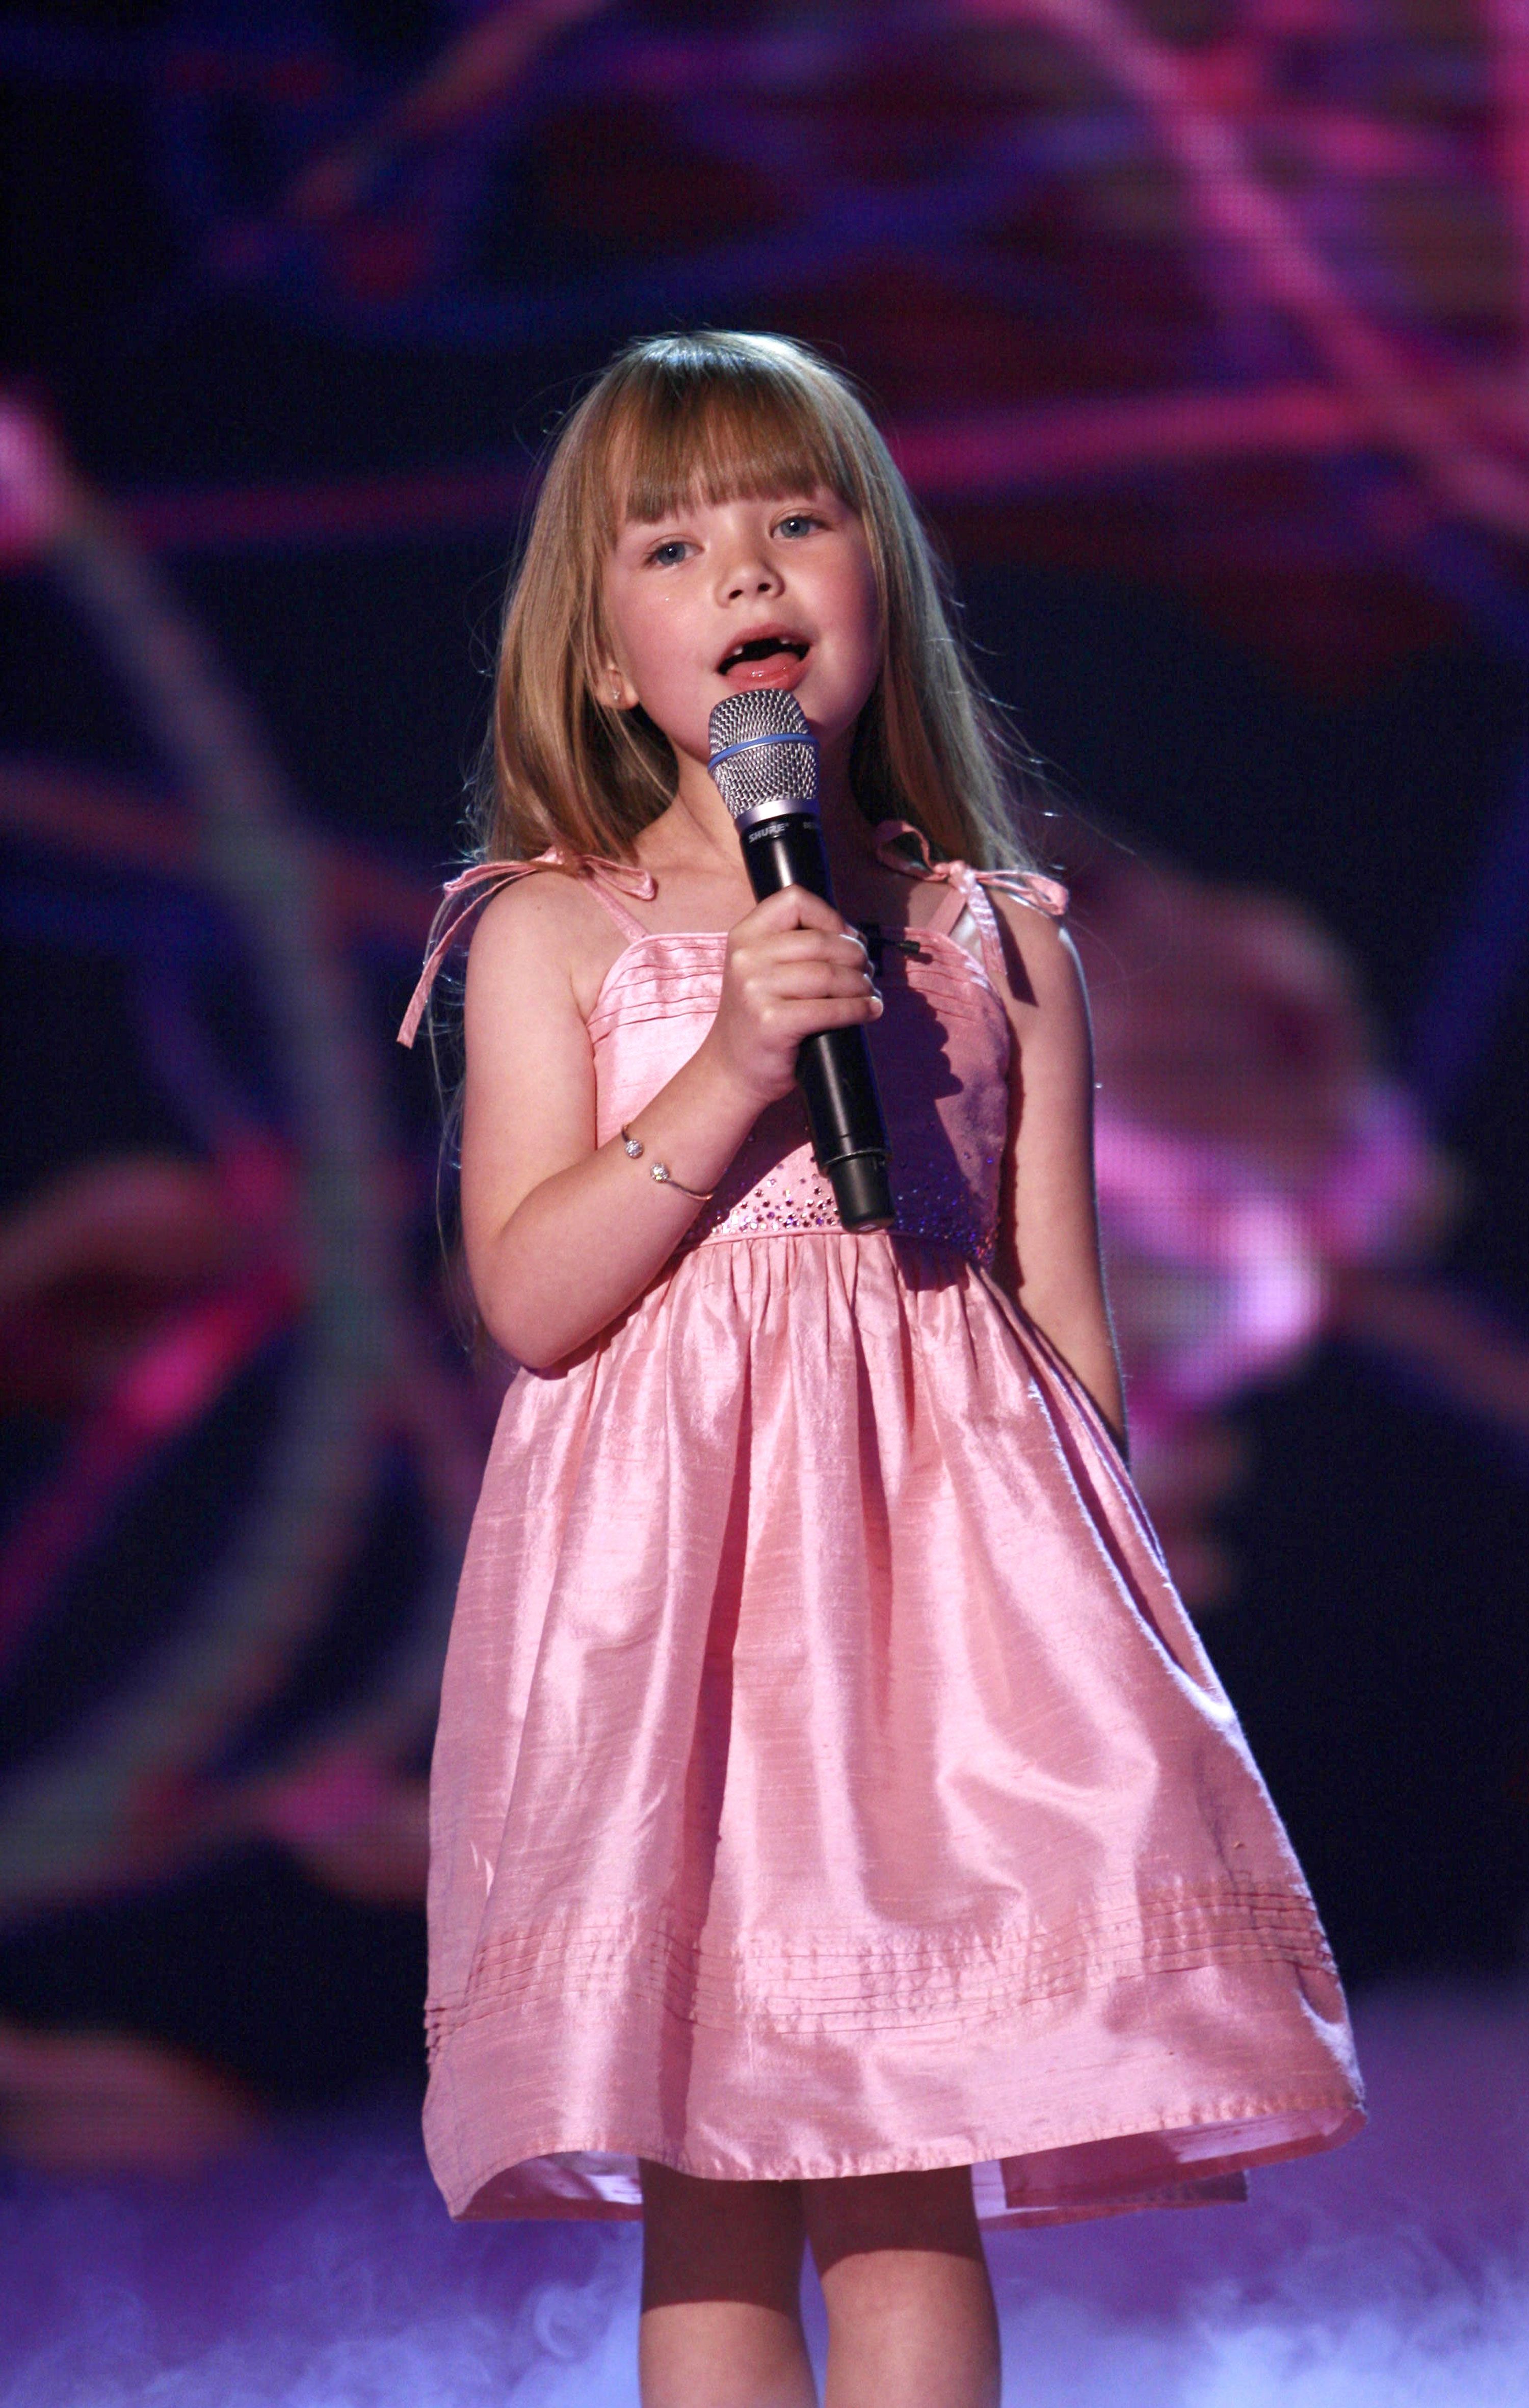 Britain's Got Talent star Connie Talbot is now 18 and looks